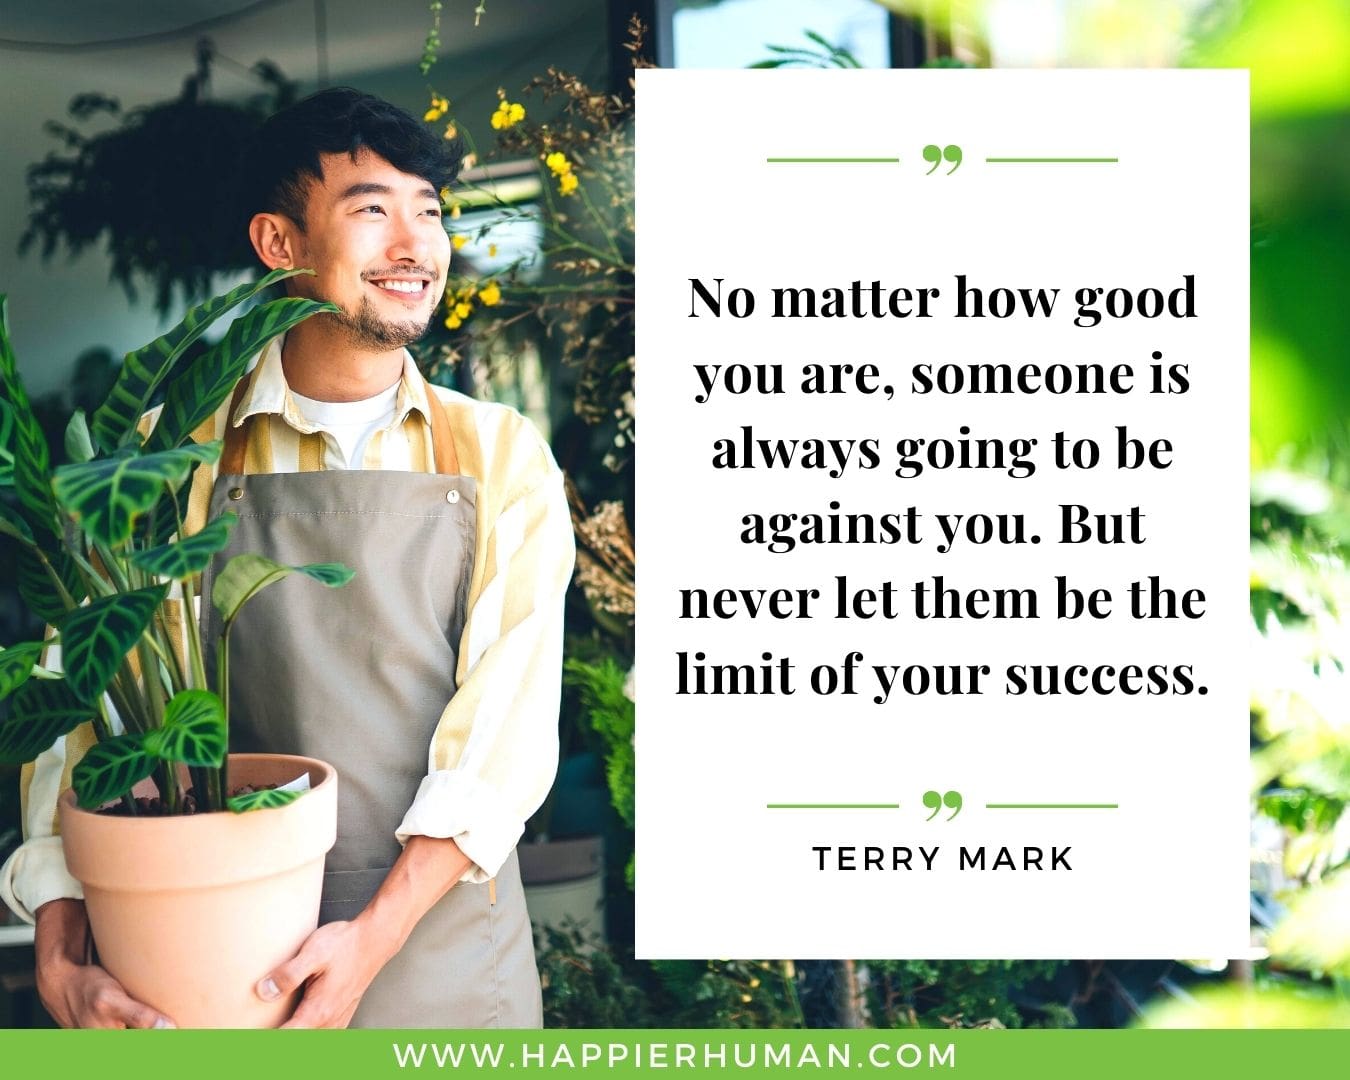 Haters Quotes - “No matter how good you are, someone is always going to be against you. But never let them be the limit of your success.” - Terry Mark